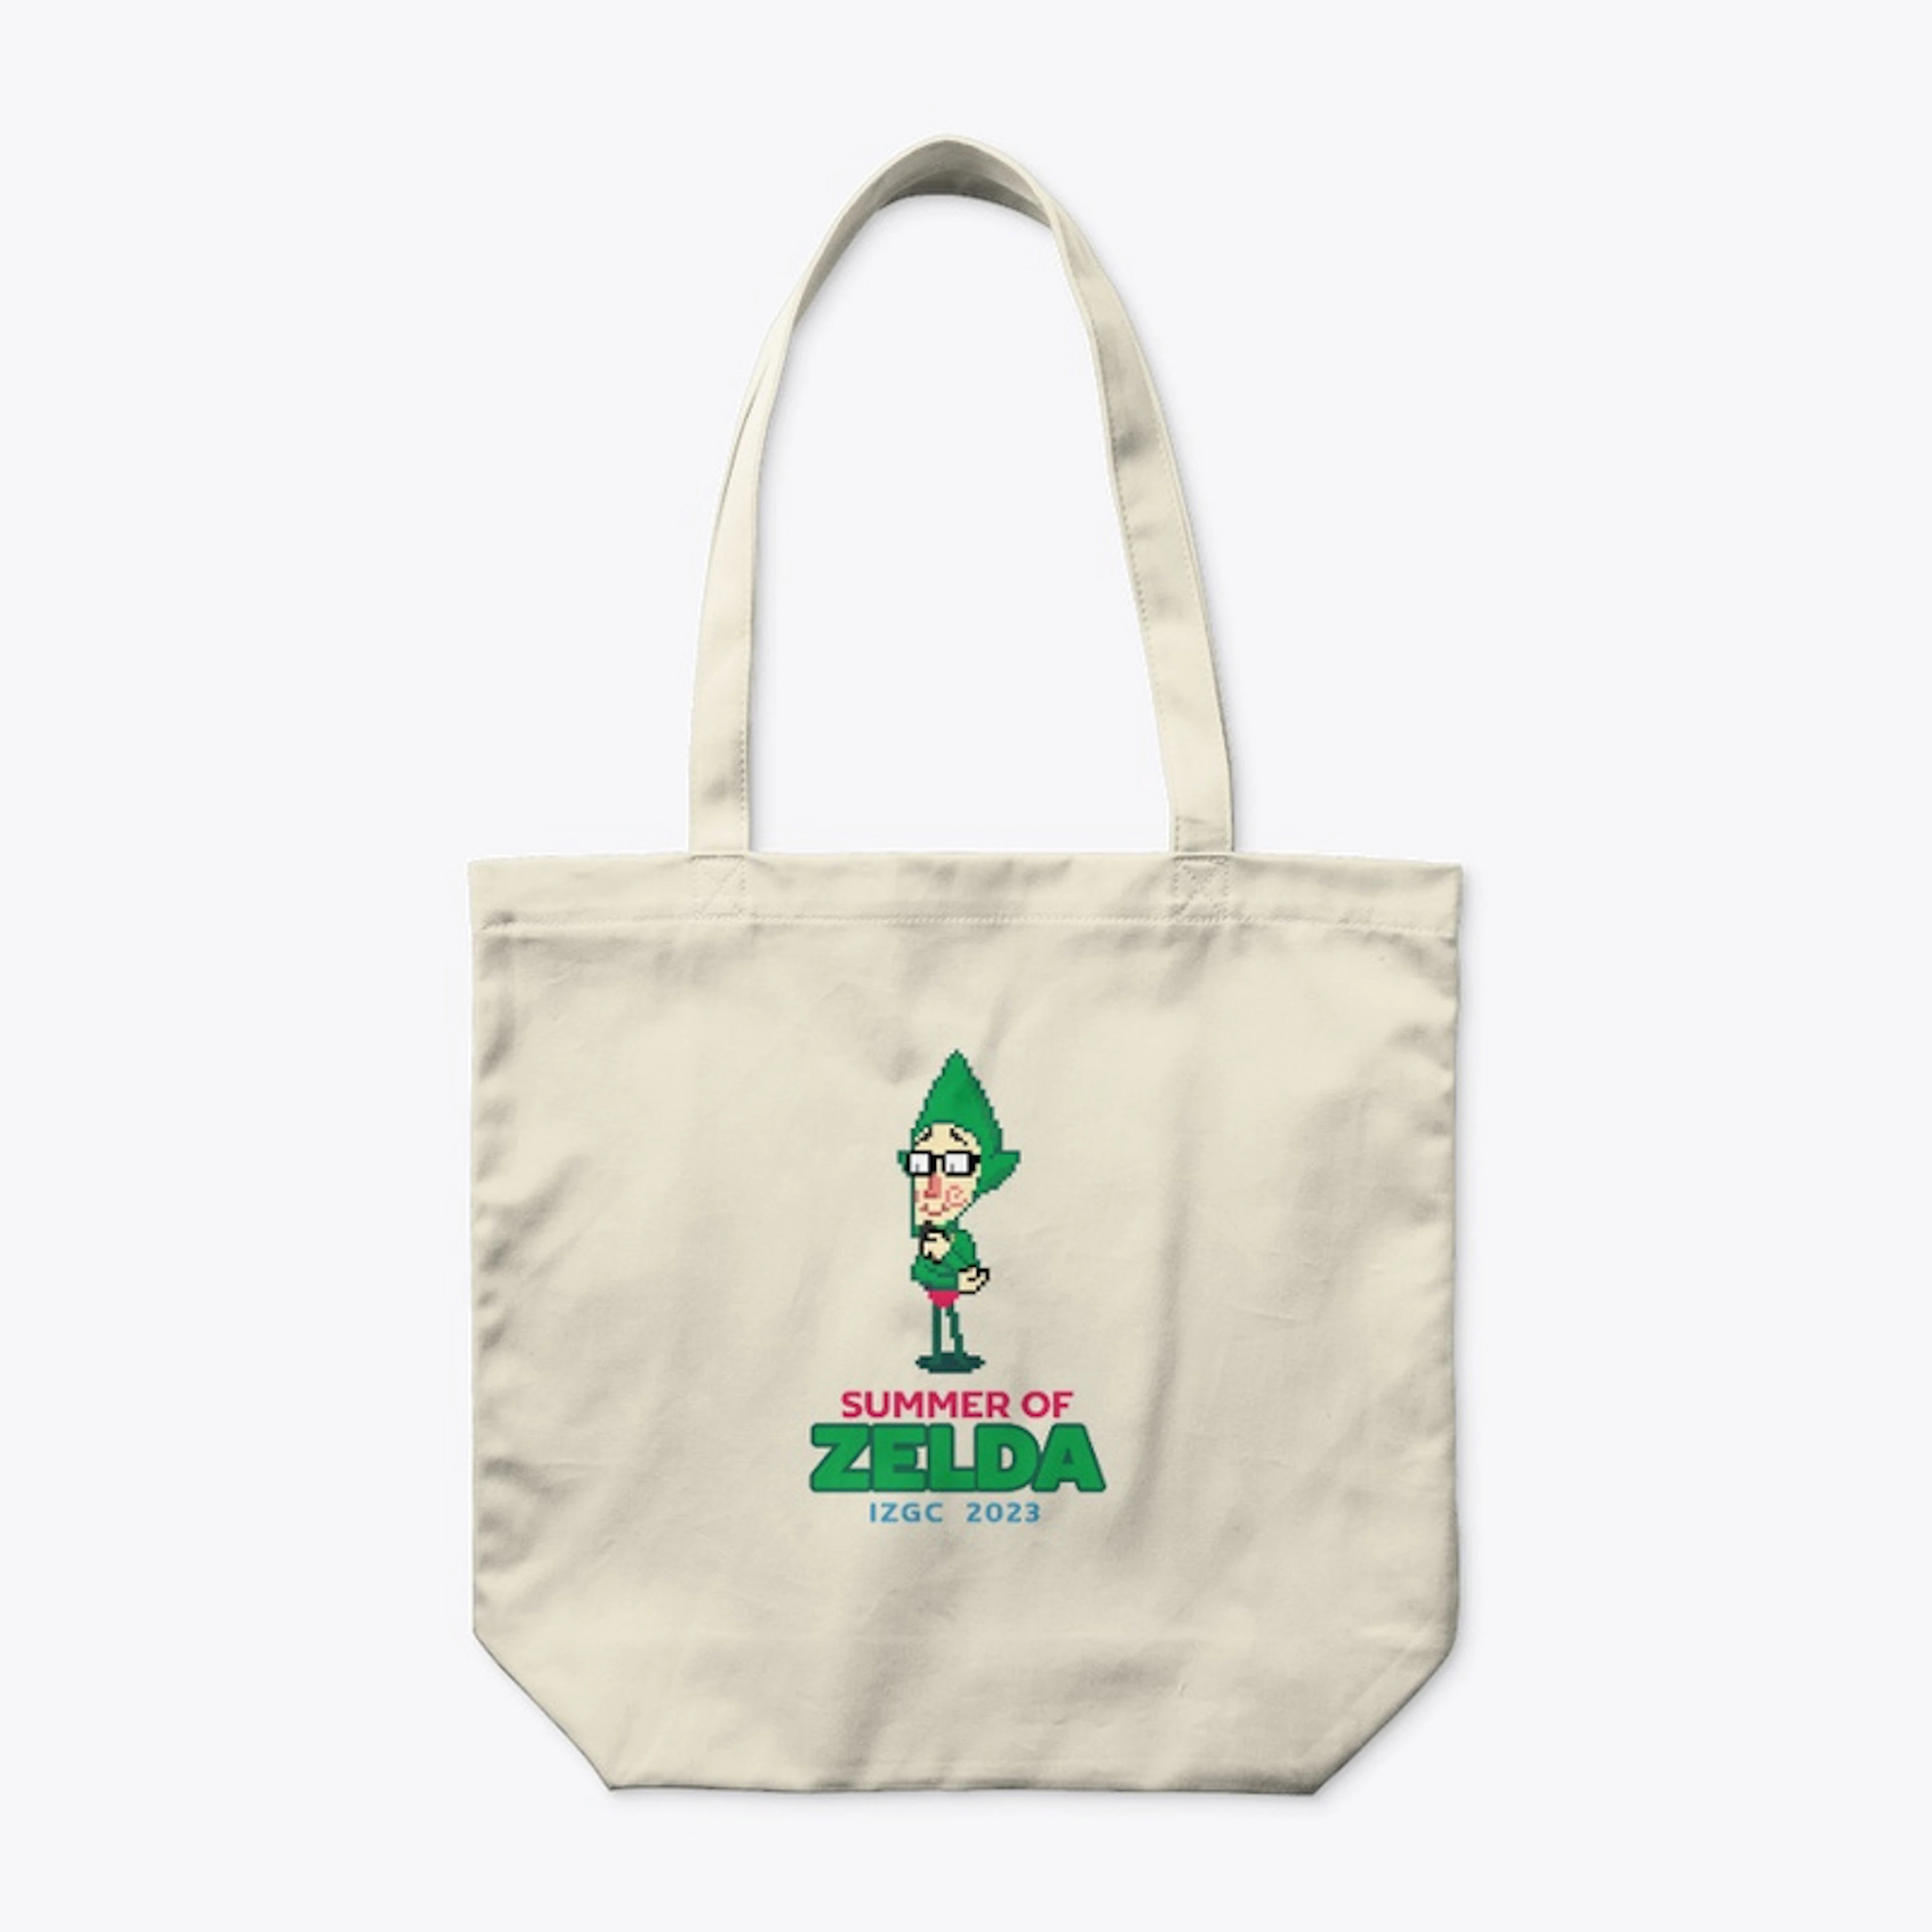 Summer of Z Tote